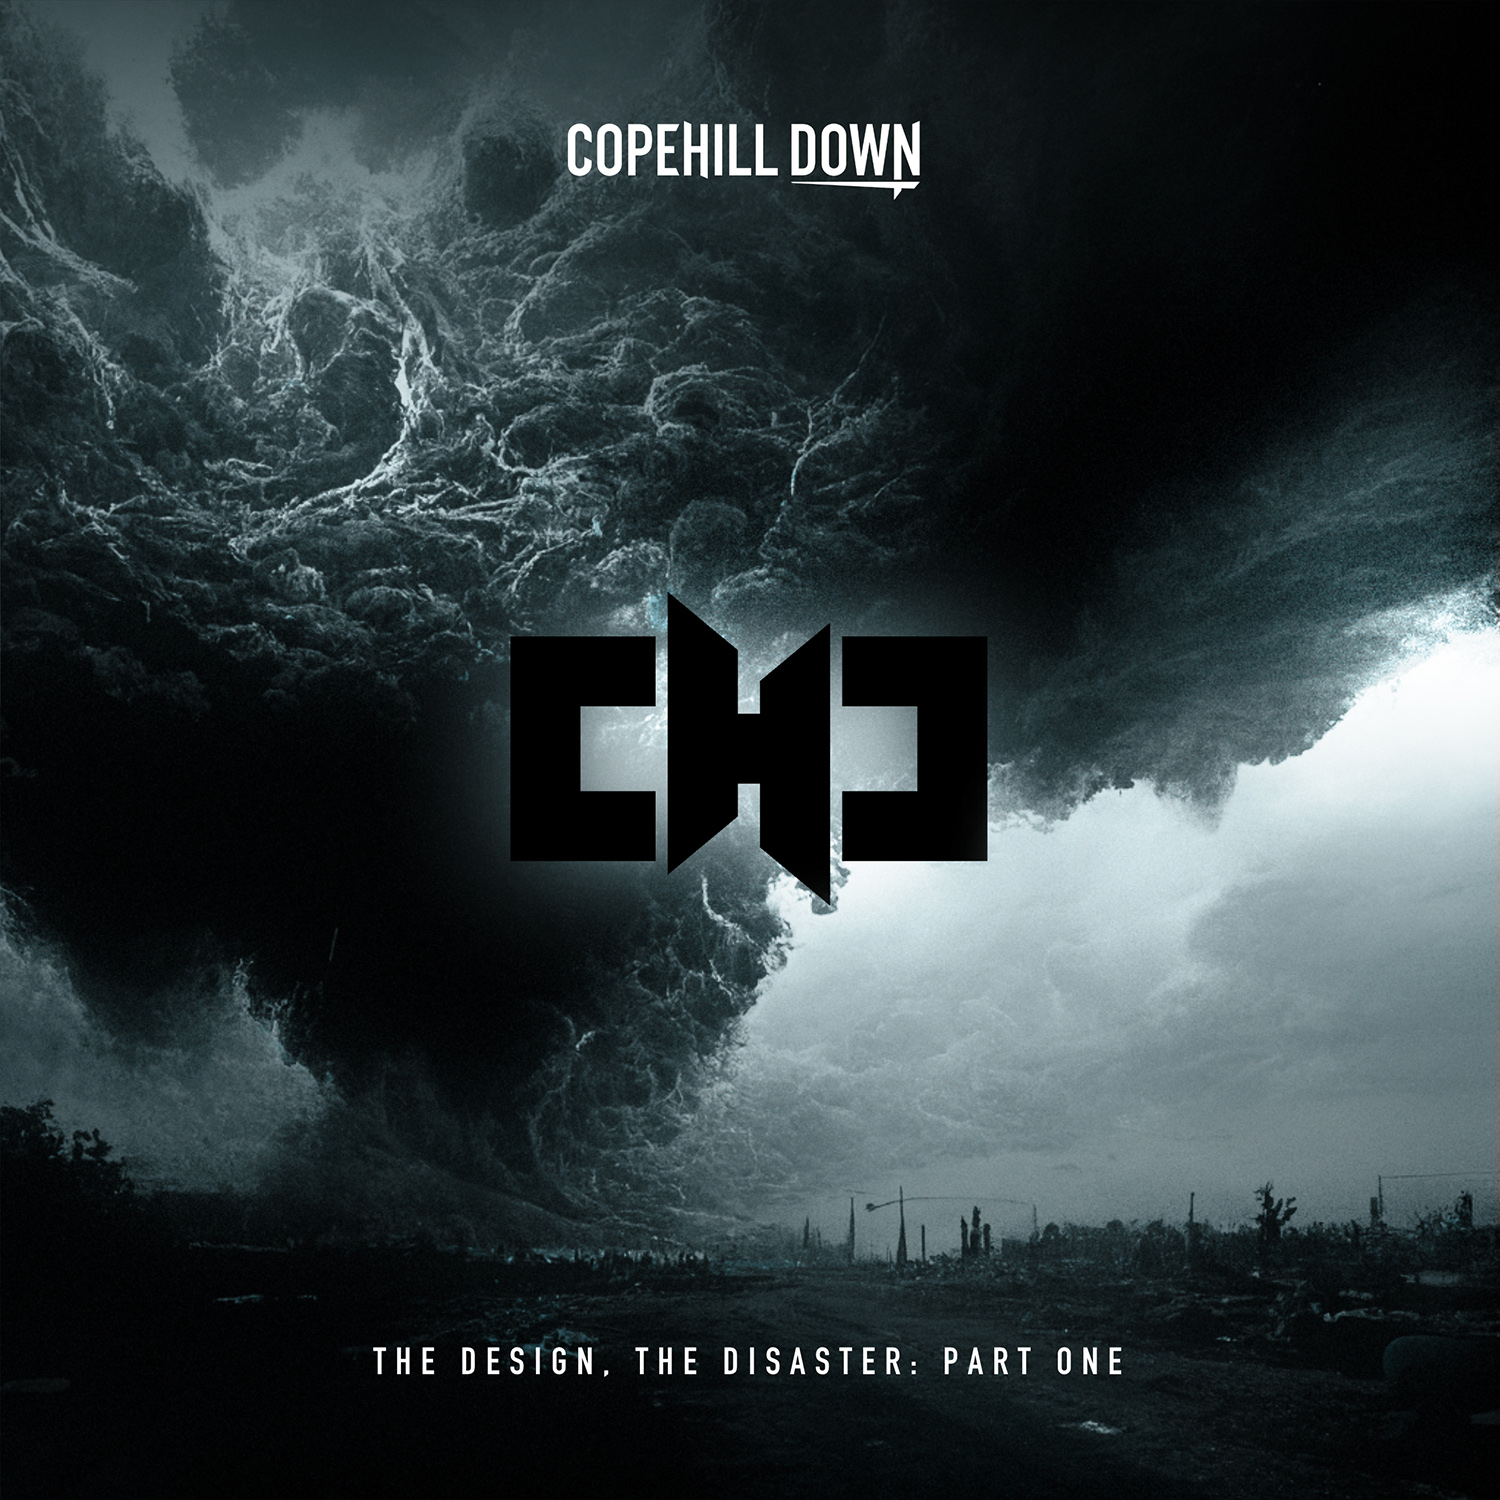 Artwork for the EP ‘The Design, The Disaster: Part One’ by Copehill Down